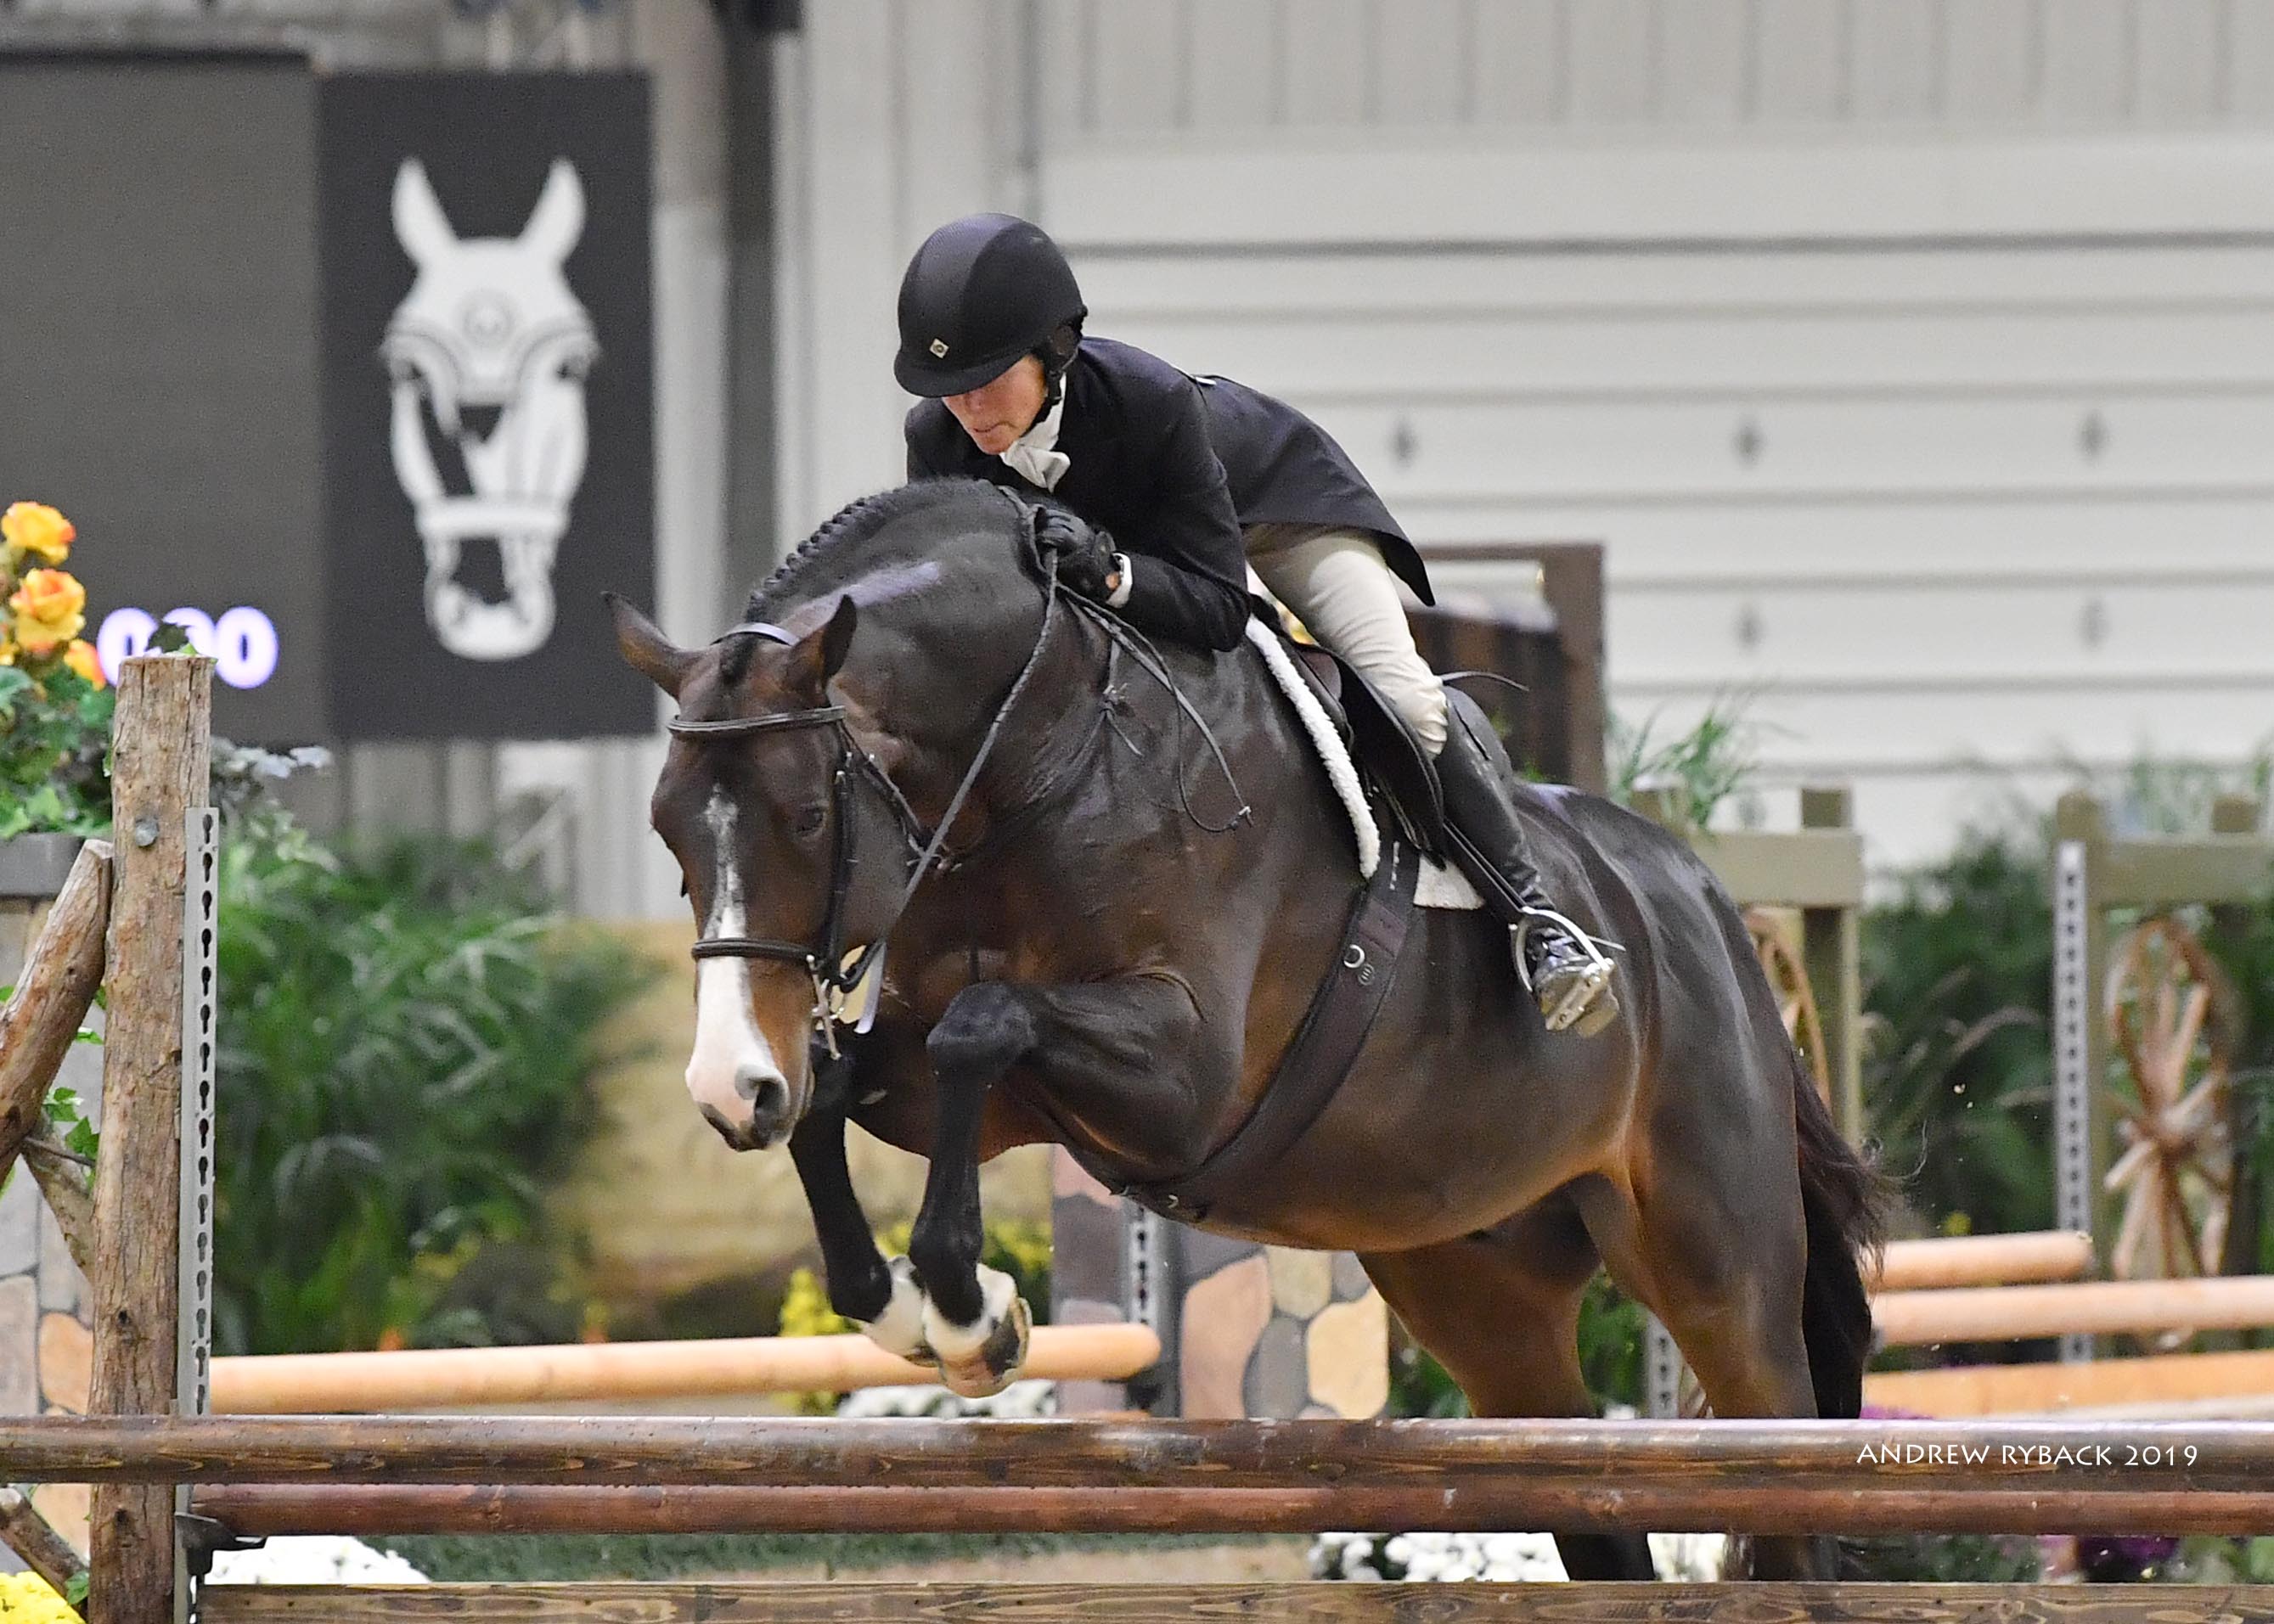 Greg Crolick and Corallo Z - the Honors Center World in Hunter Top $40,000 Derby USHJA International Equestrian Take